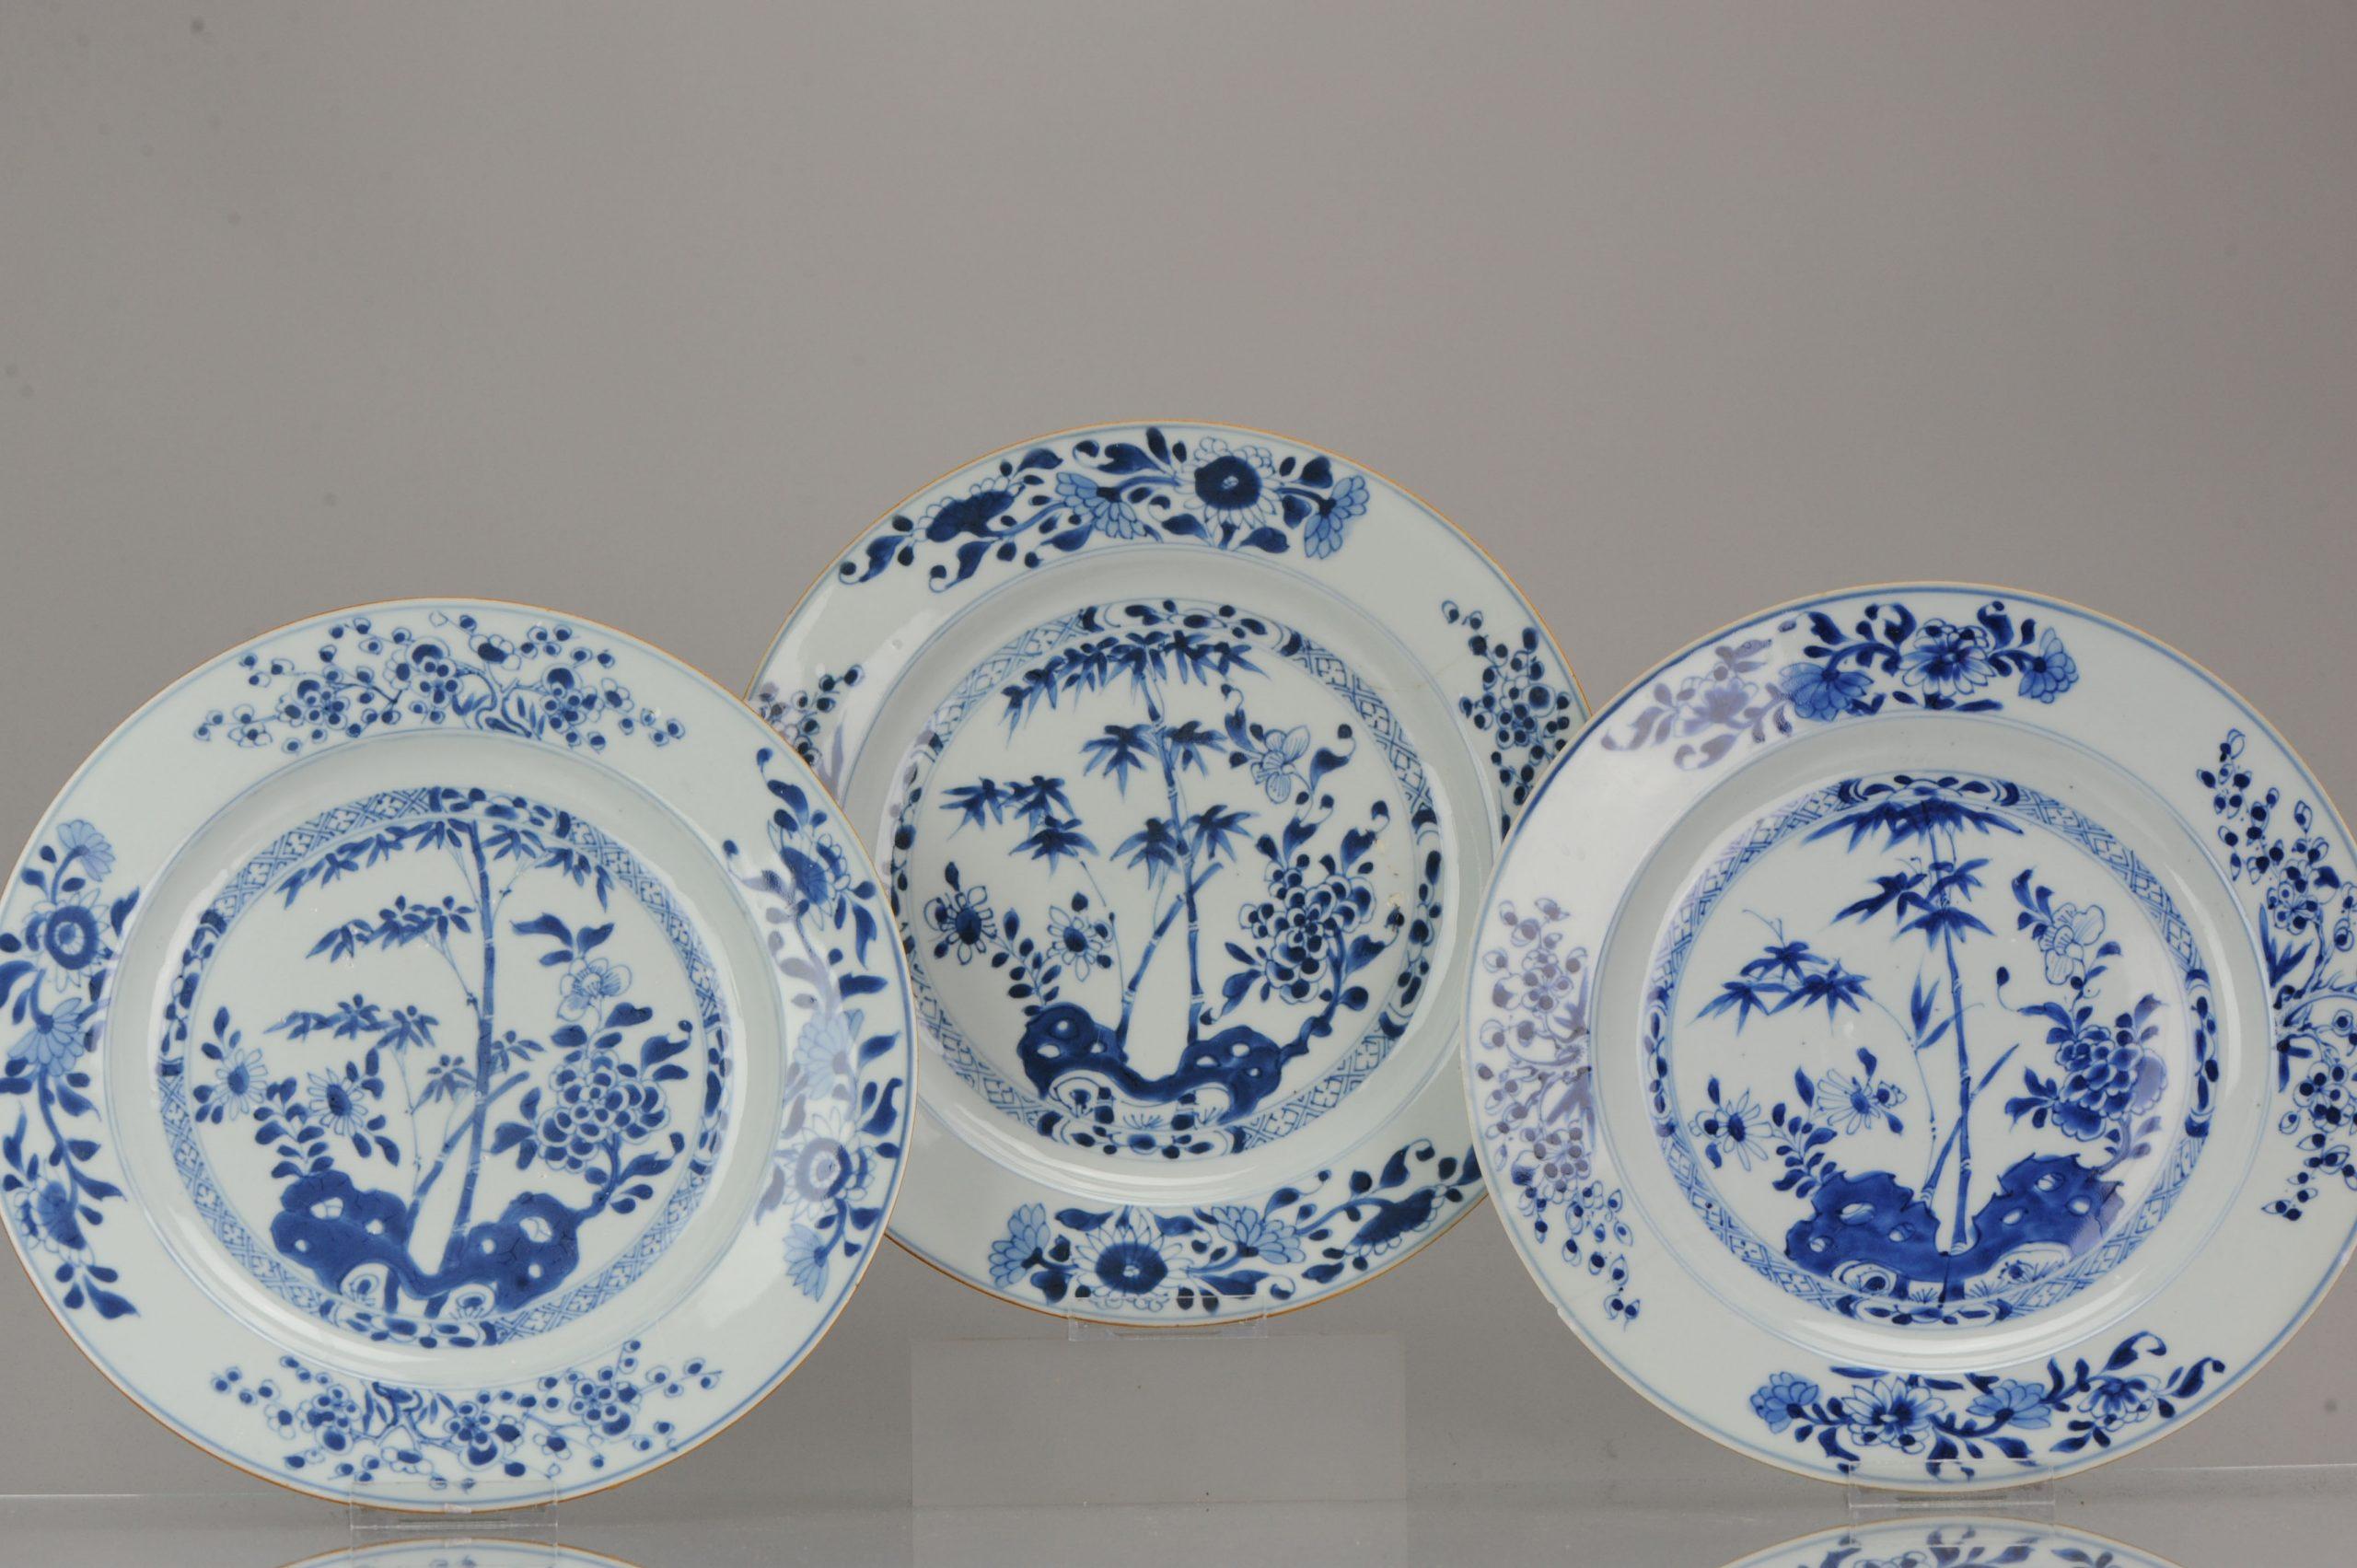 A very nicely decorated set of plates. Dating to circa 1710-1730

A scene of plum, bamboo, peony and chrysanthemum. Plates that would for example be given at a marriage or birthday. With the flowers symbolizing a long life in wealth for man and